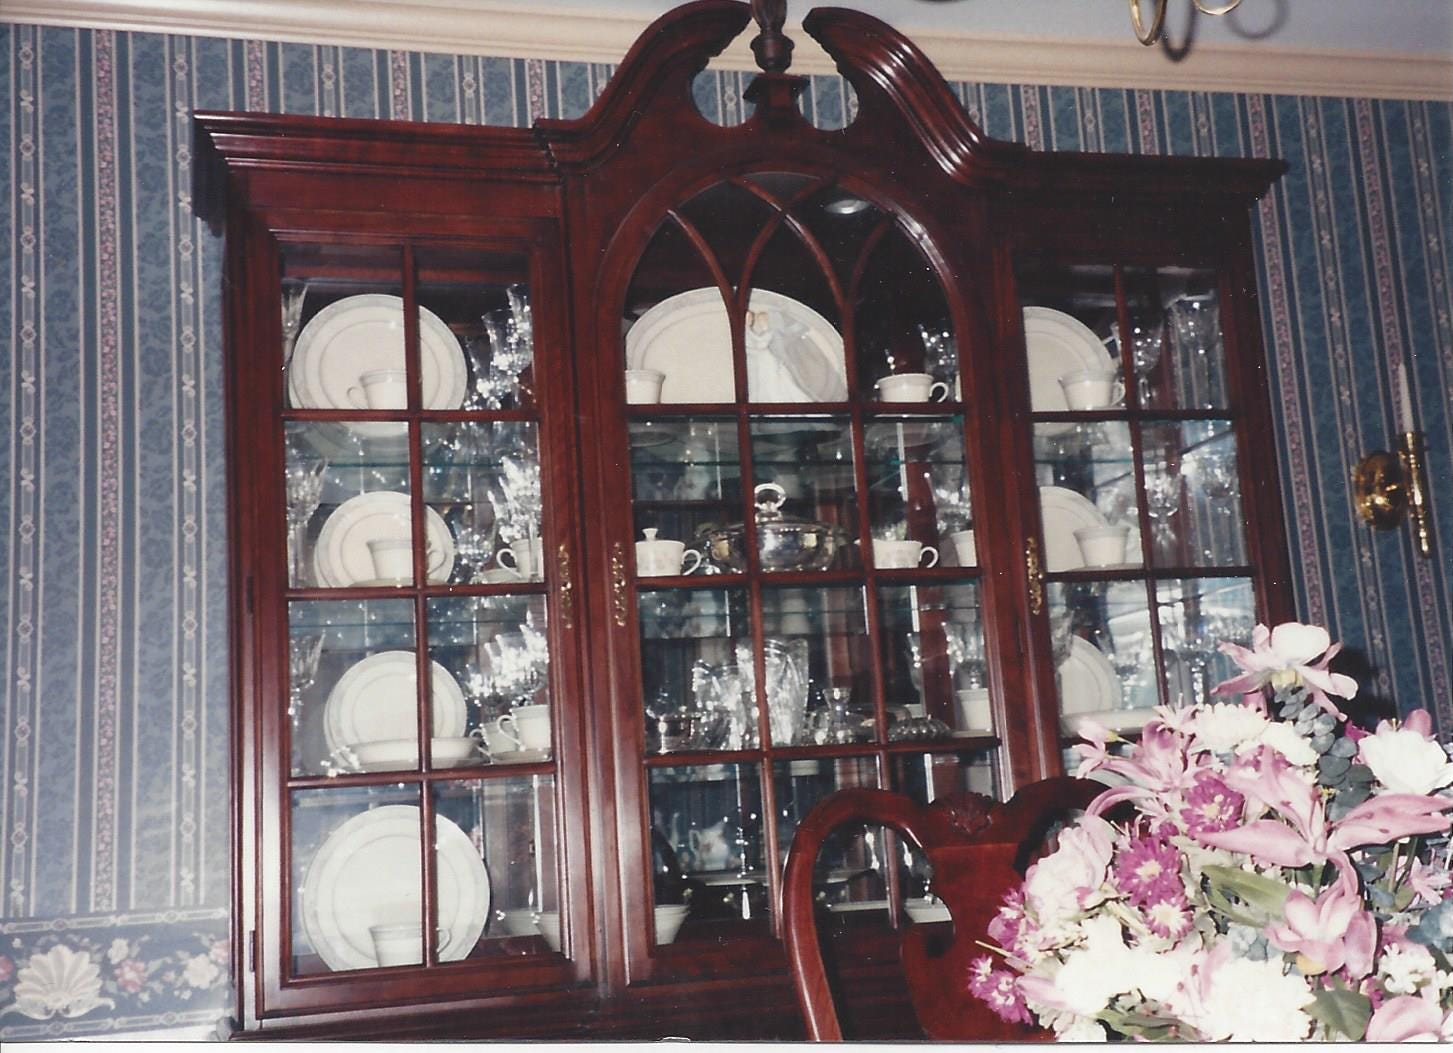 Close-up of a cherry Queen-Ann- style china closet with the good china visible inside